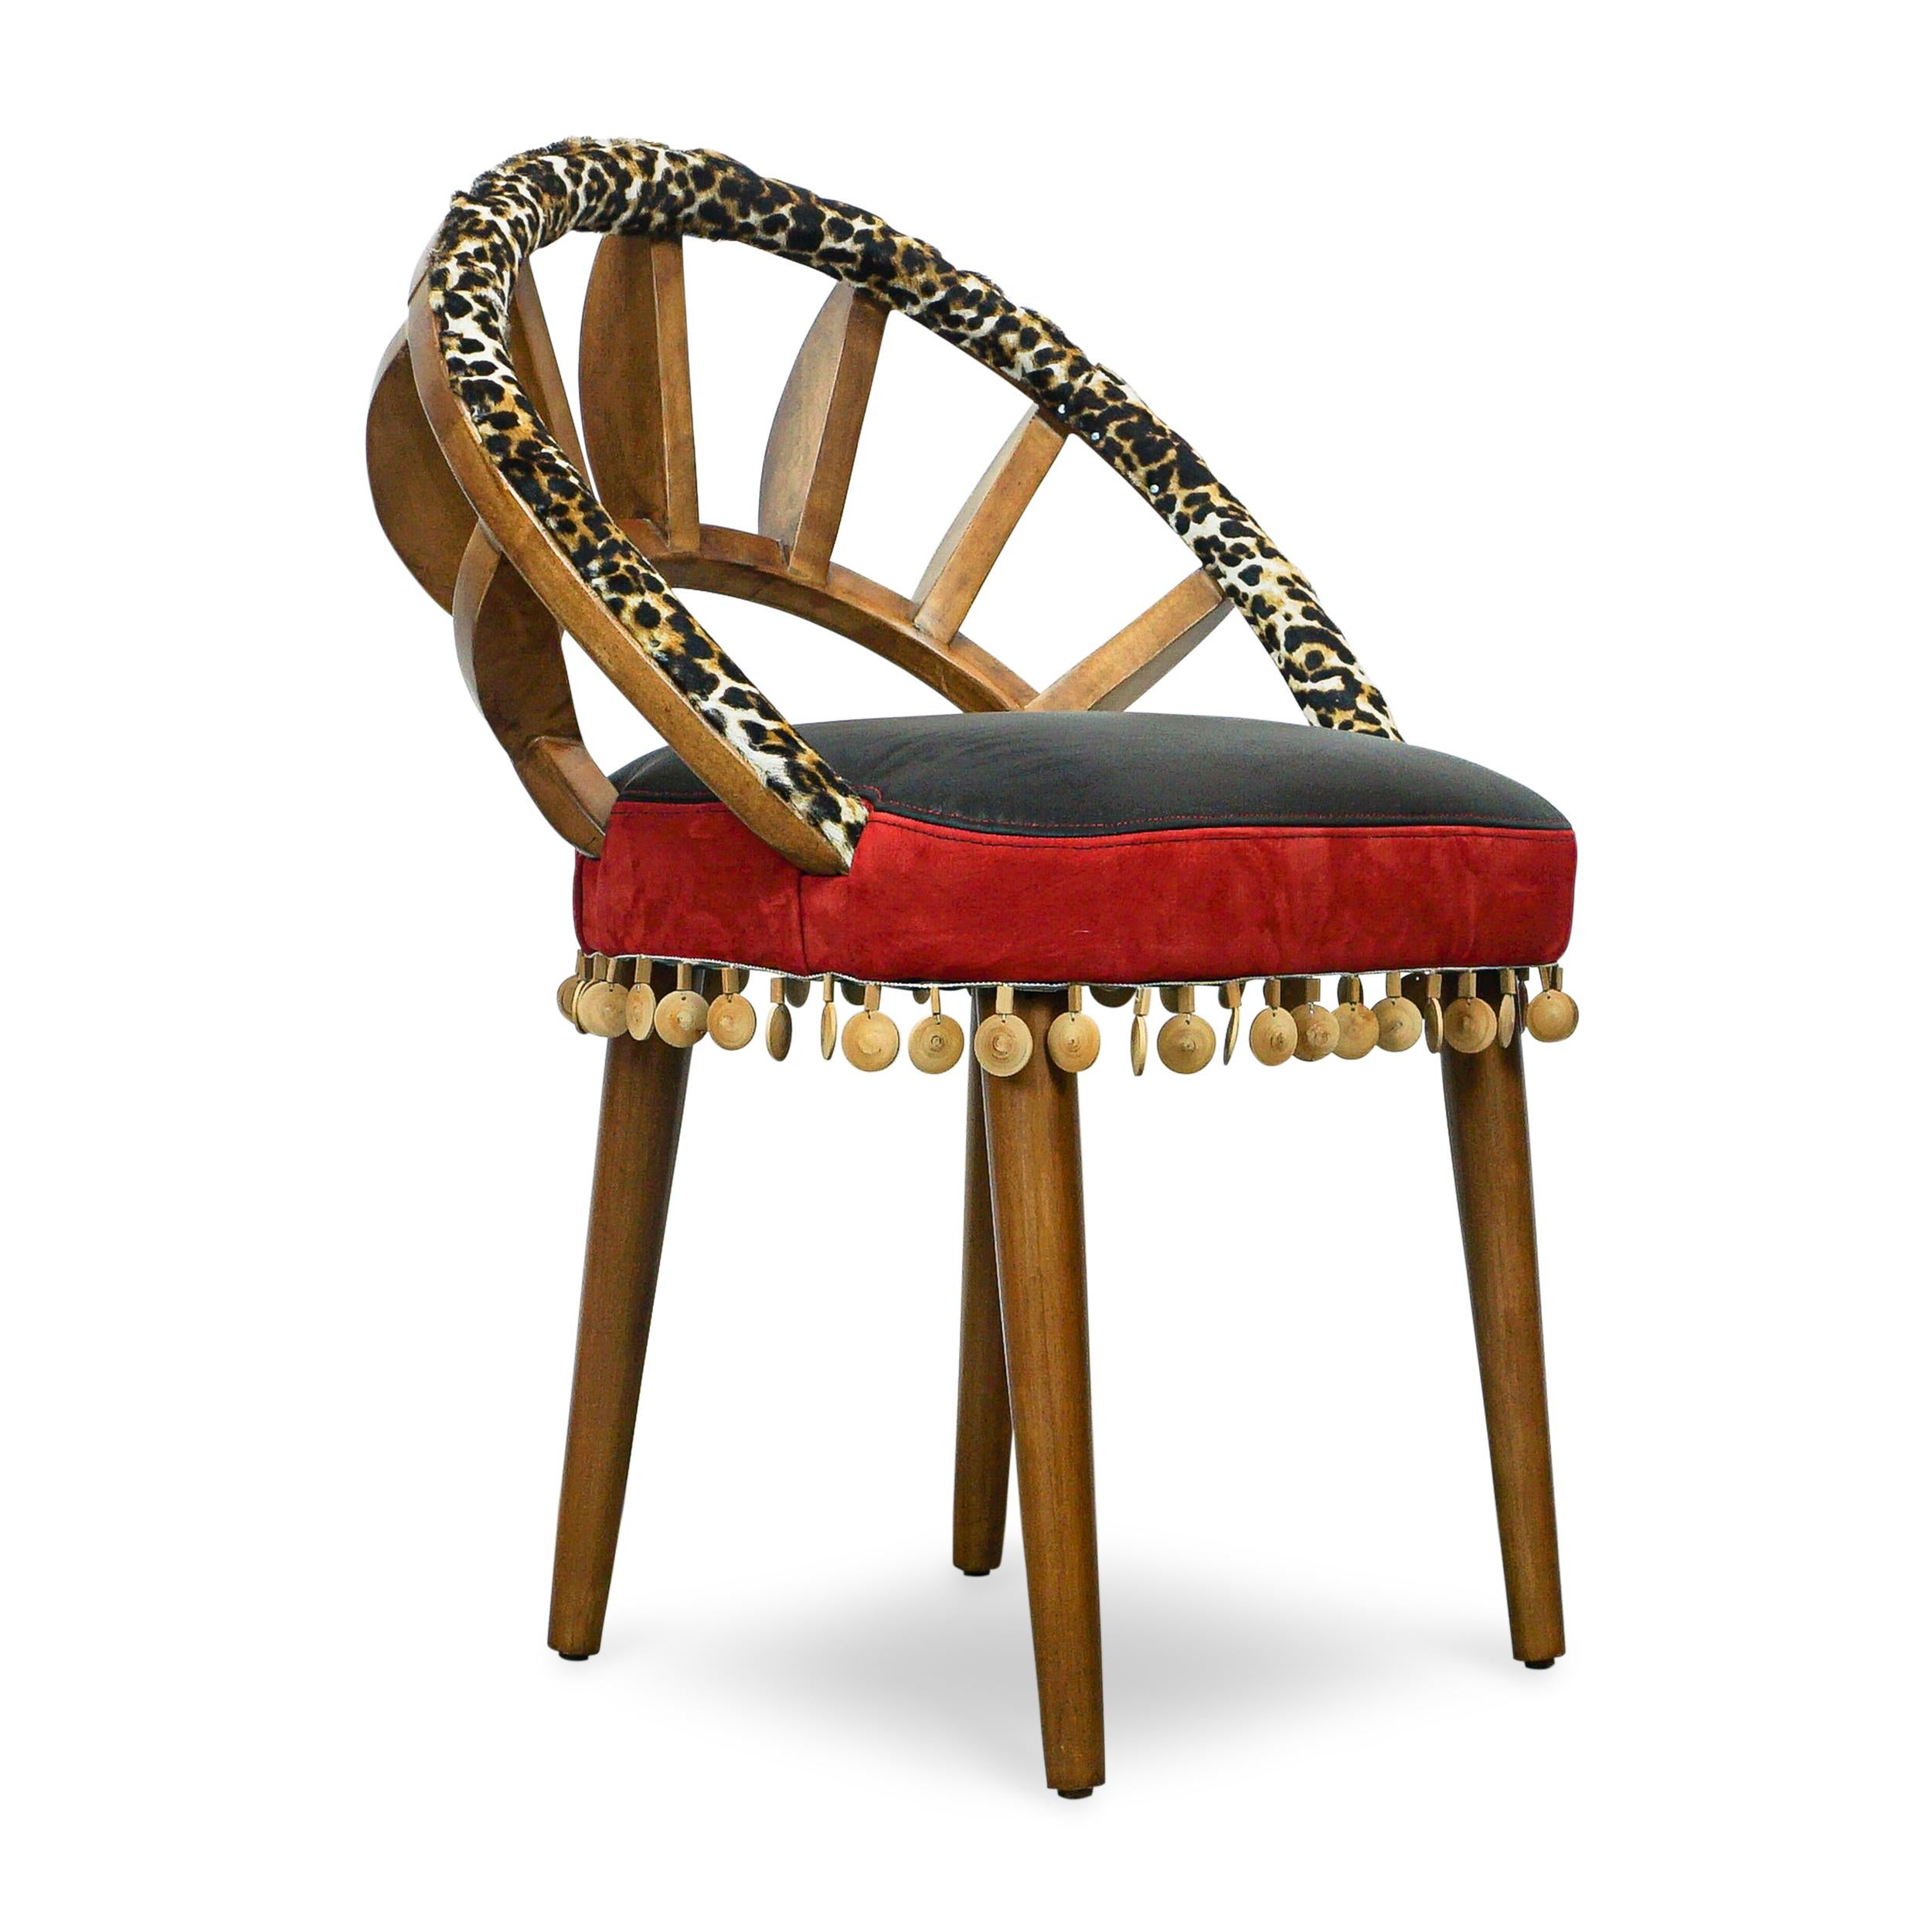 Purchase may be limited to quantity 2 or more, just ask.
Dining / side / occasional chair with ribbed exposed wood frame (maple). Back rail upholstered with cheetah printed hair on hide. Seat upholstered with black leather and red suede and finished